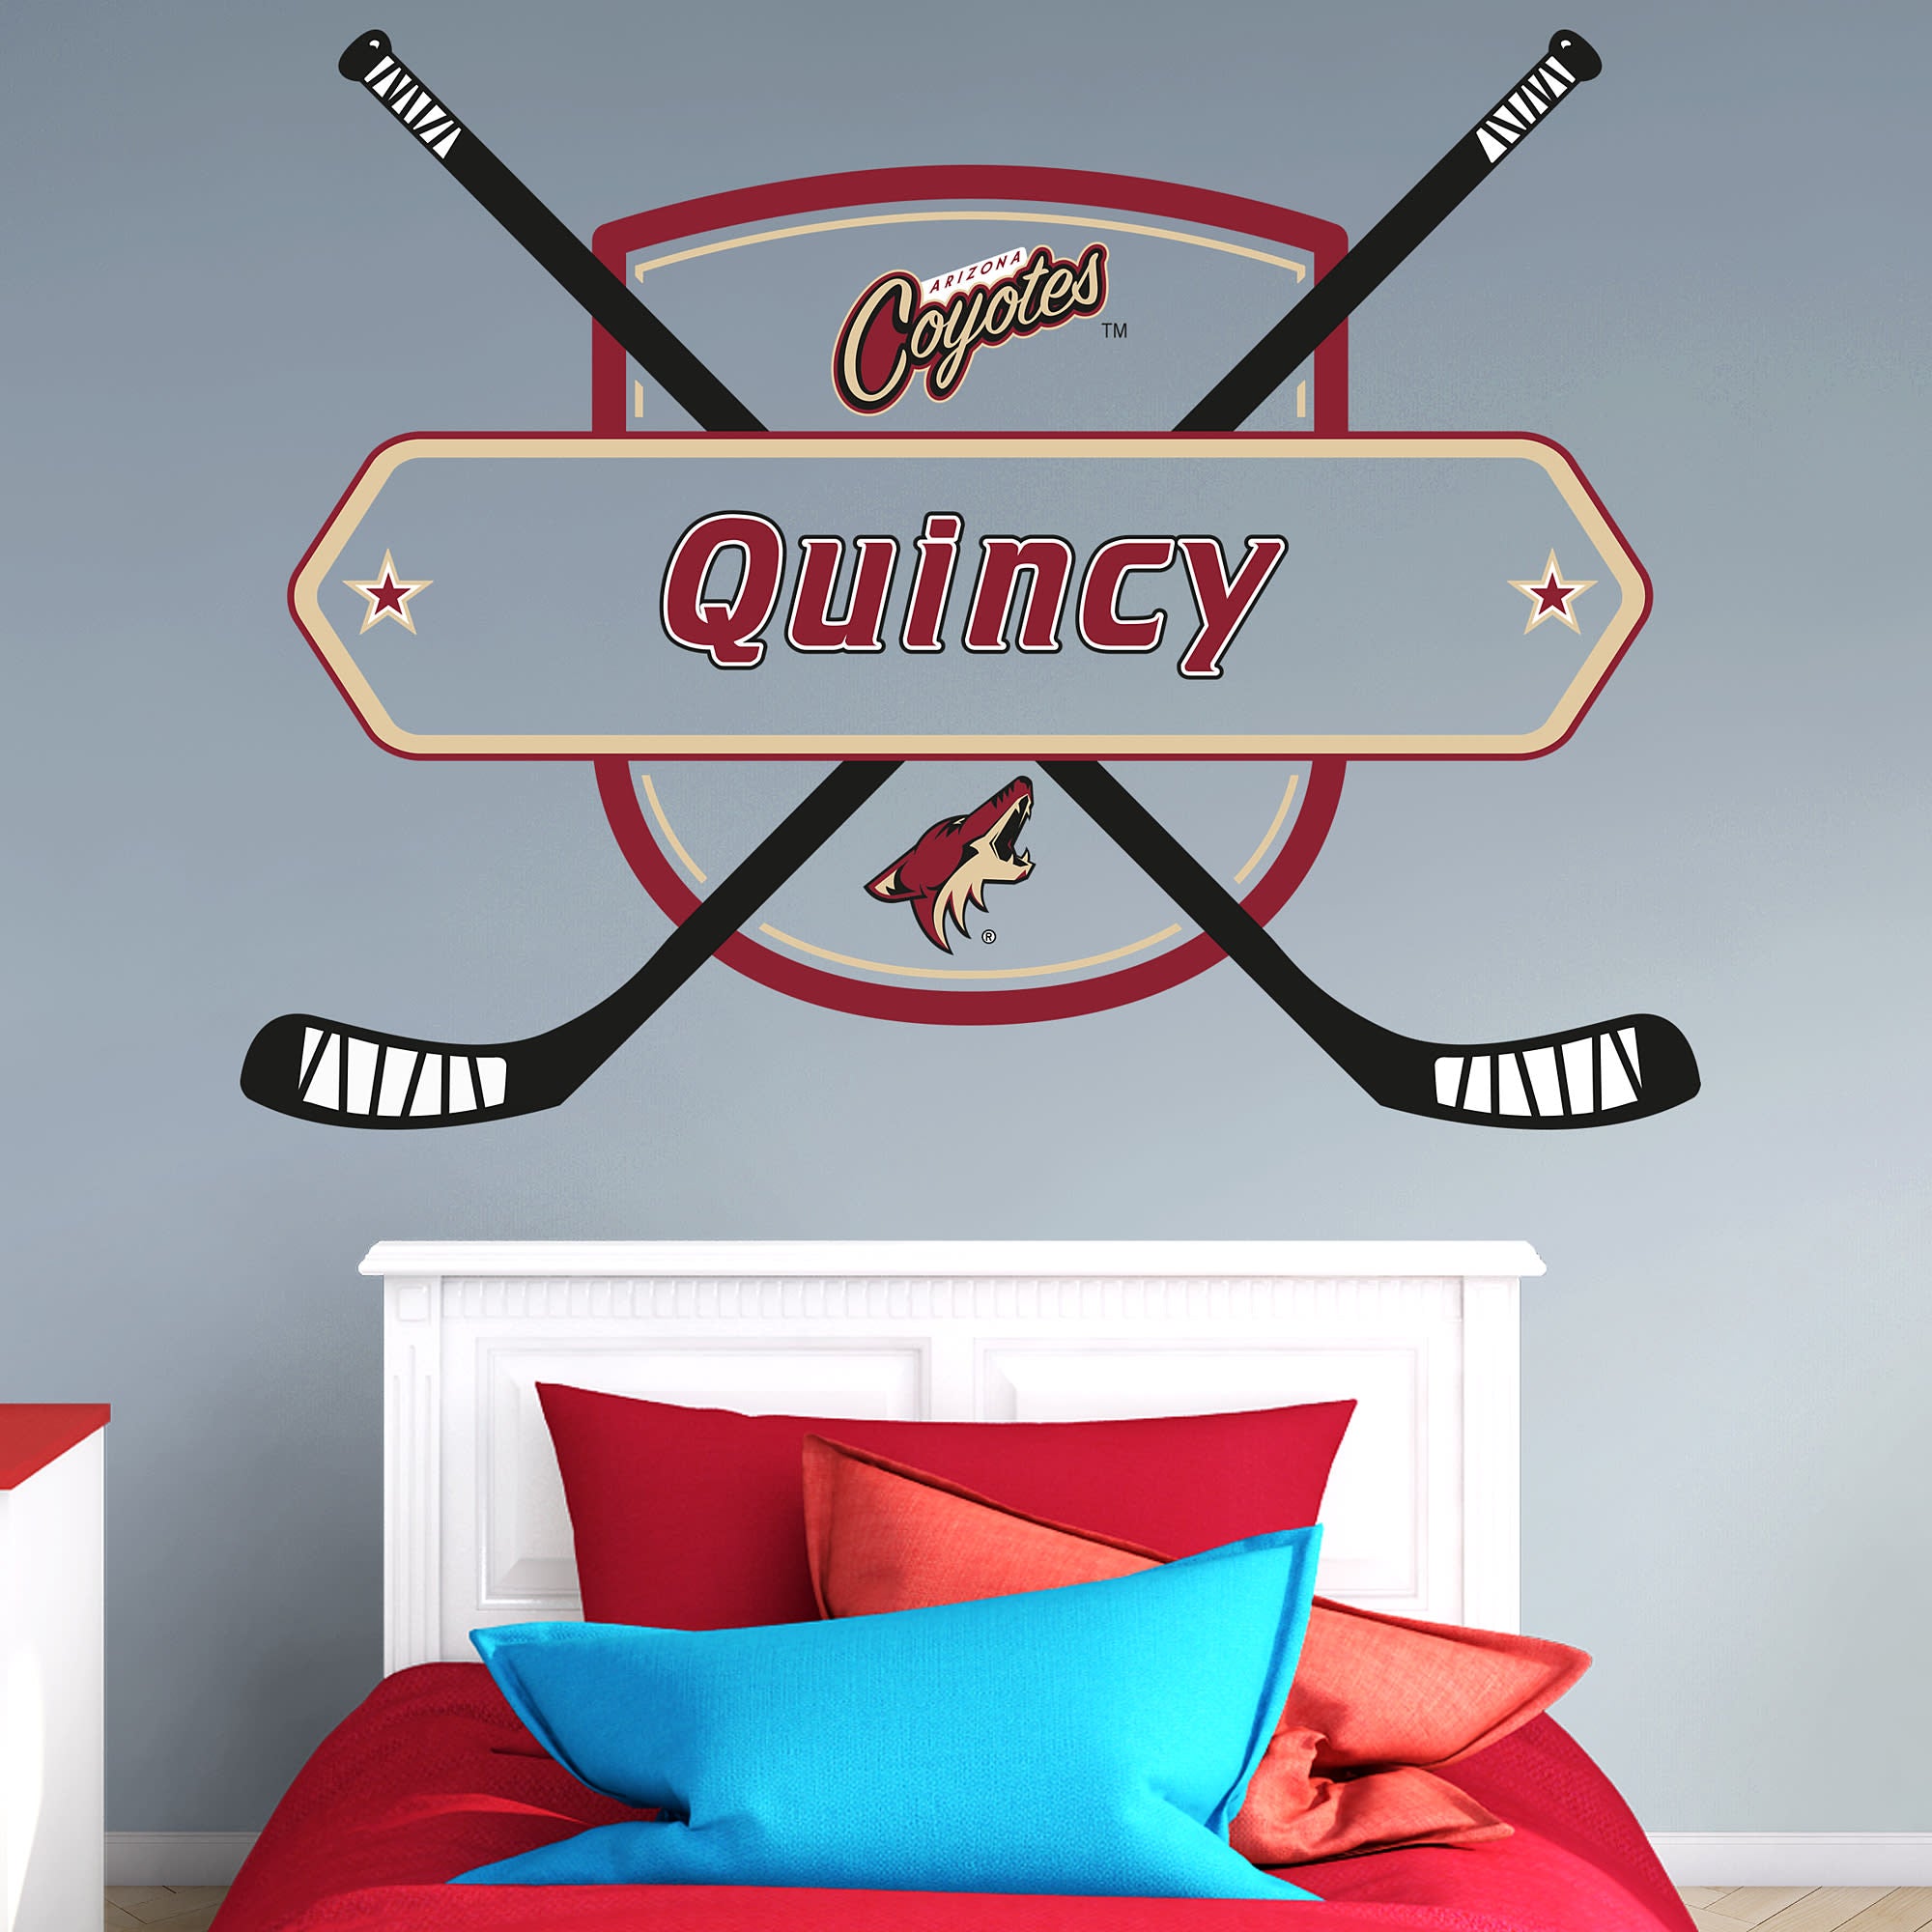 Arizona Coyotes: Personalized Name - Officially Licensed NHL Transfer Decal 51.0"W x 38.0"H by Fathead | Vinyl